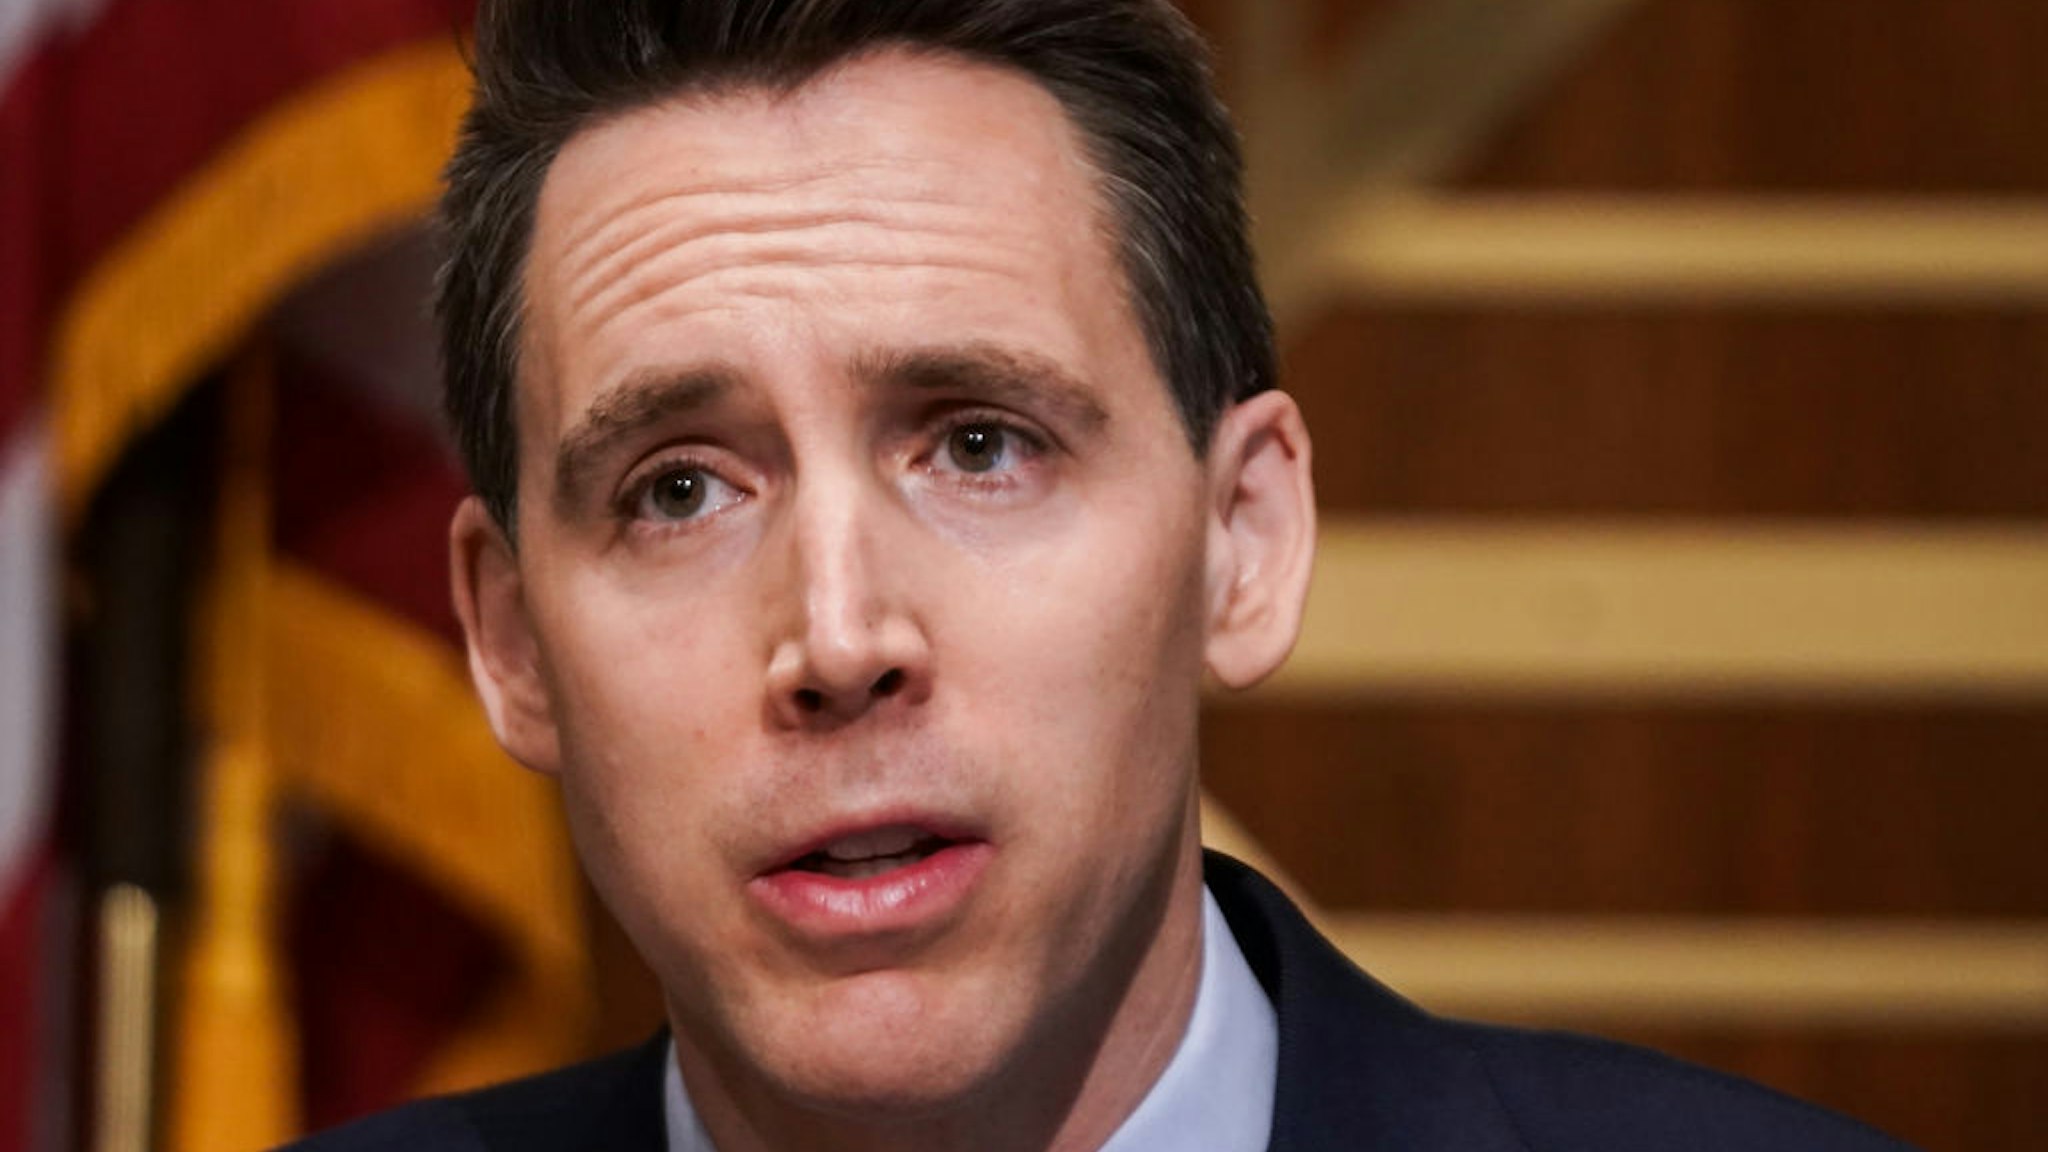 Sen. Josh Hawley (R-MO) asks questions during a Senate Homeland Security and Governmental Affairs Committee hearing to discuss election security and the 2020 election process on December 16, 2020 in Washington, DC.